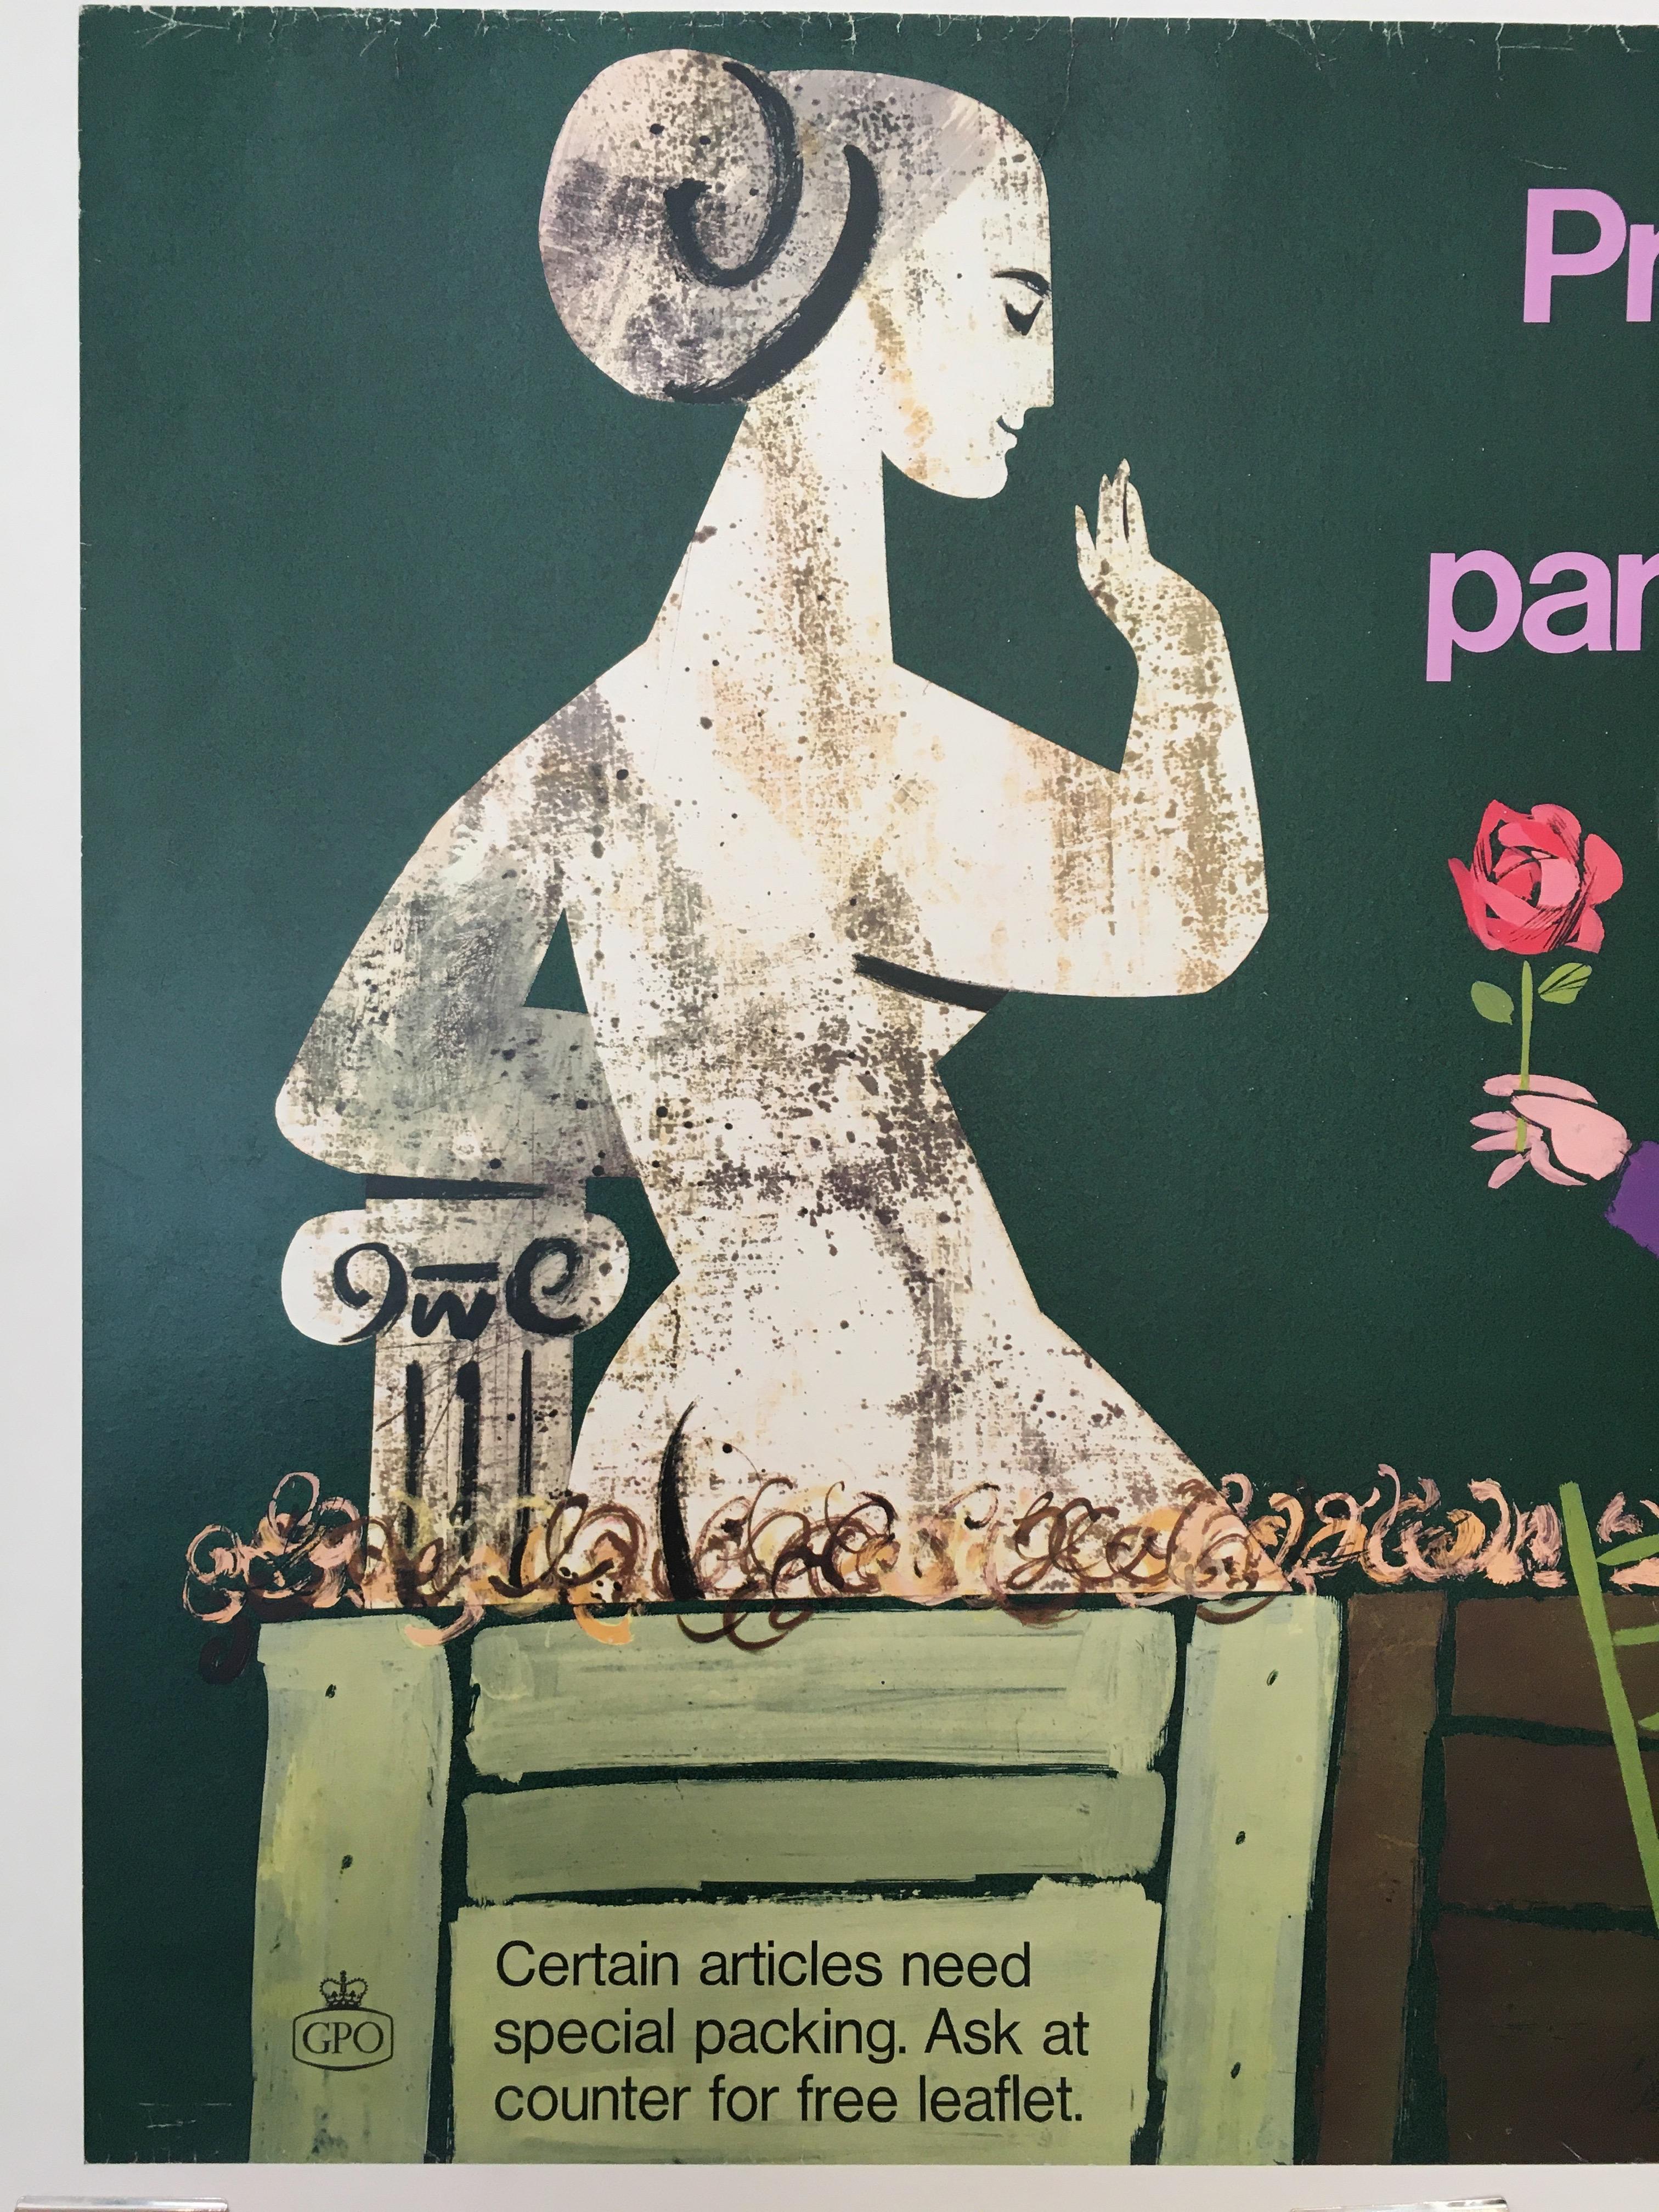 Properly Packed Parcels Please - GPO statue original vintage poster

This poster was part of a series of designs that stretch from 1962 until the early 1970s. They were often humorous, featuring bright colors or children. This poster has been